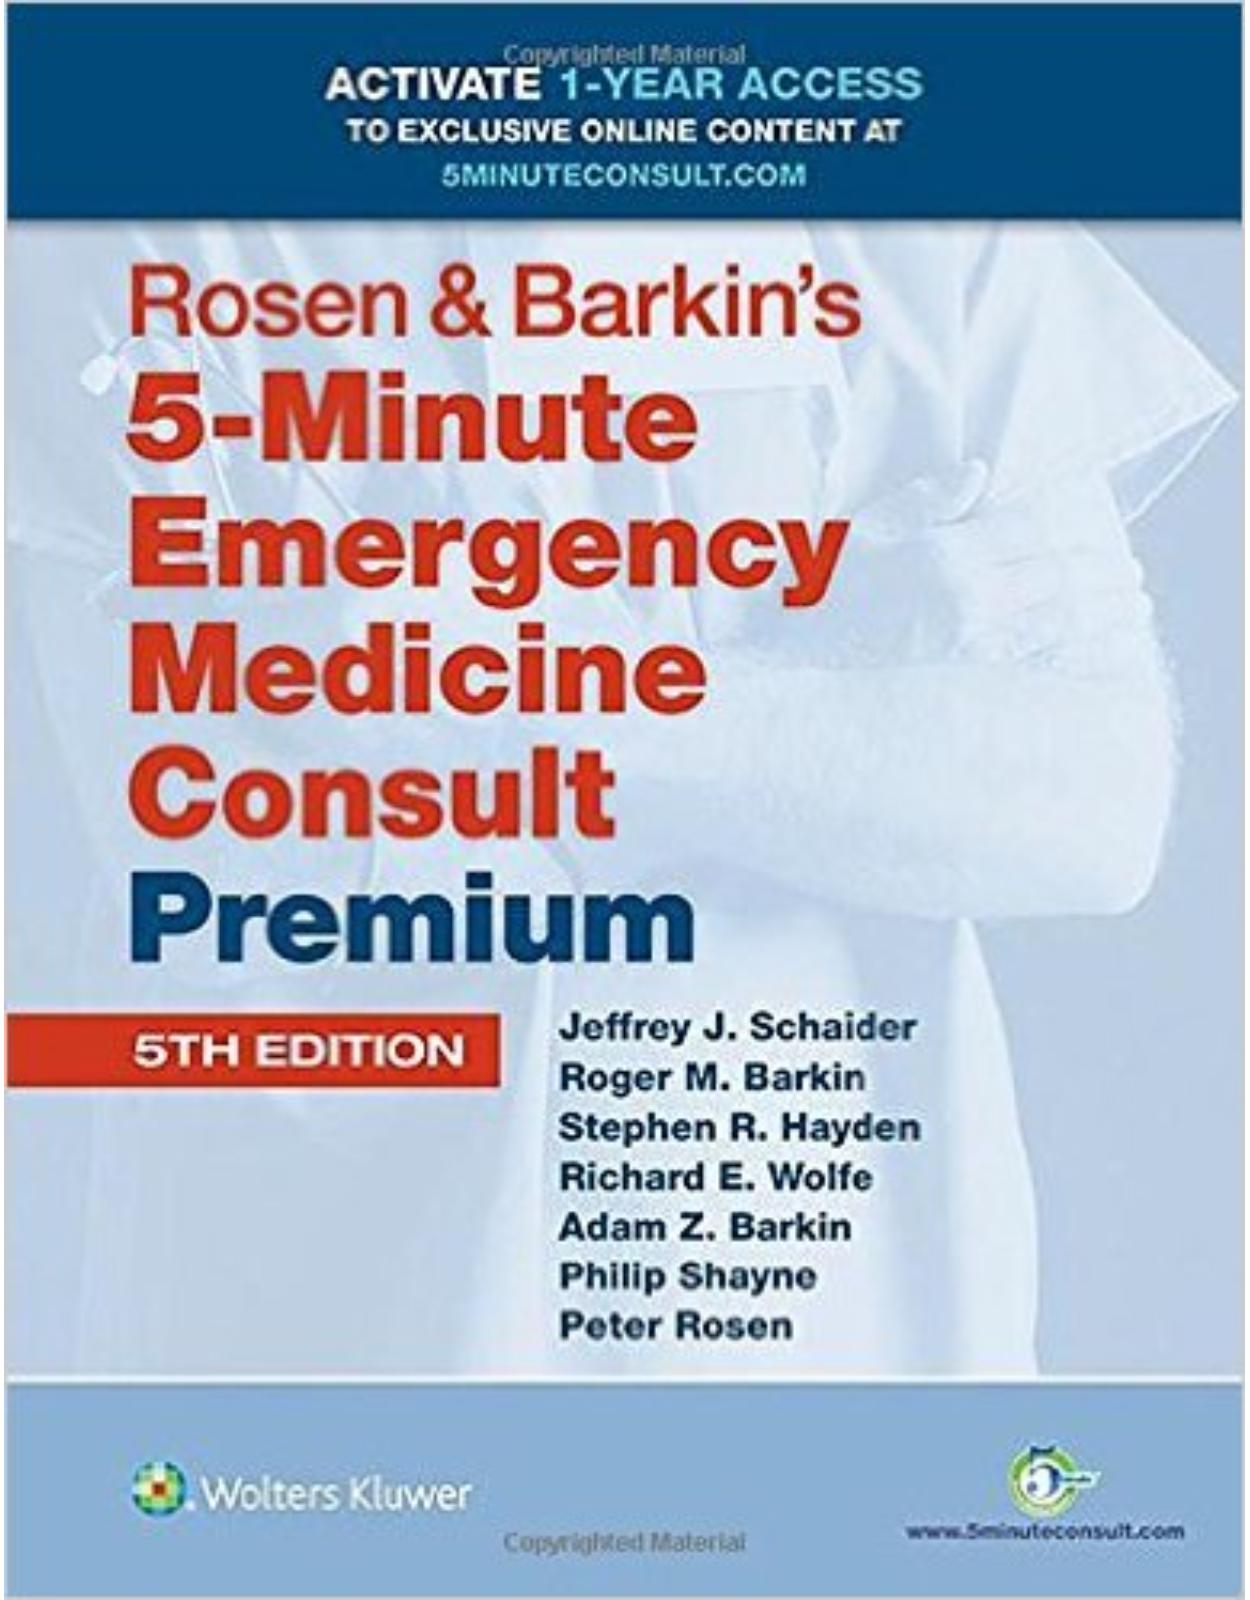 Rosen & Barkin’s 5-Minute Emergency Medicine Consult Premium Edition: 1-year Enhanced Online Access + Print (The 5-Minute Consult Series) 